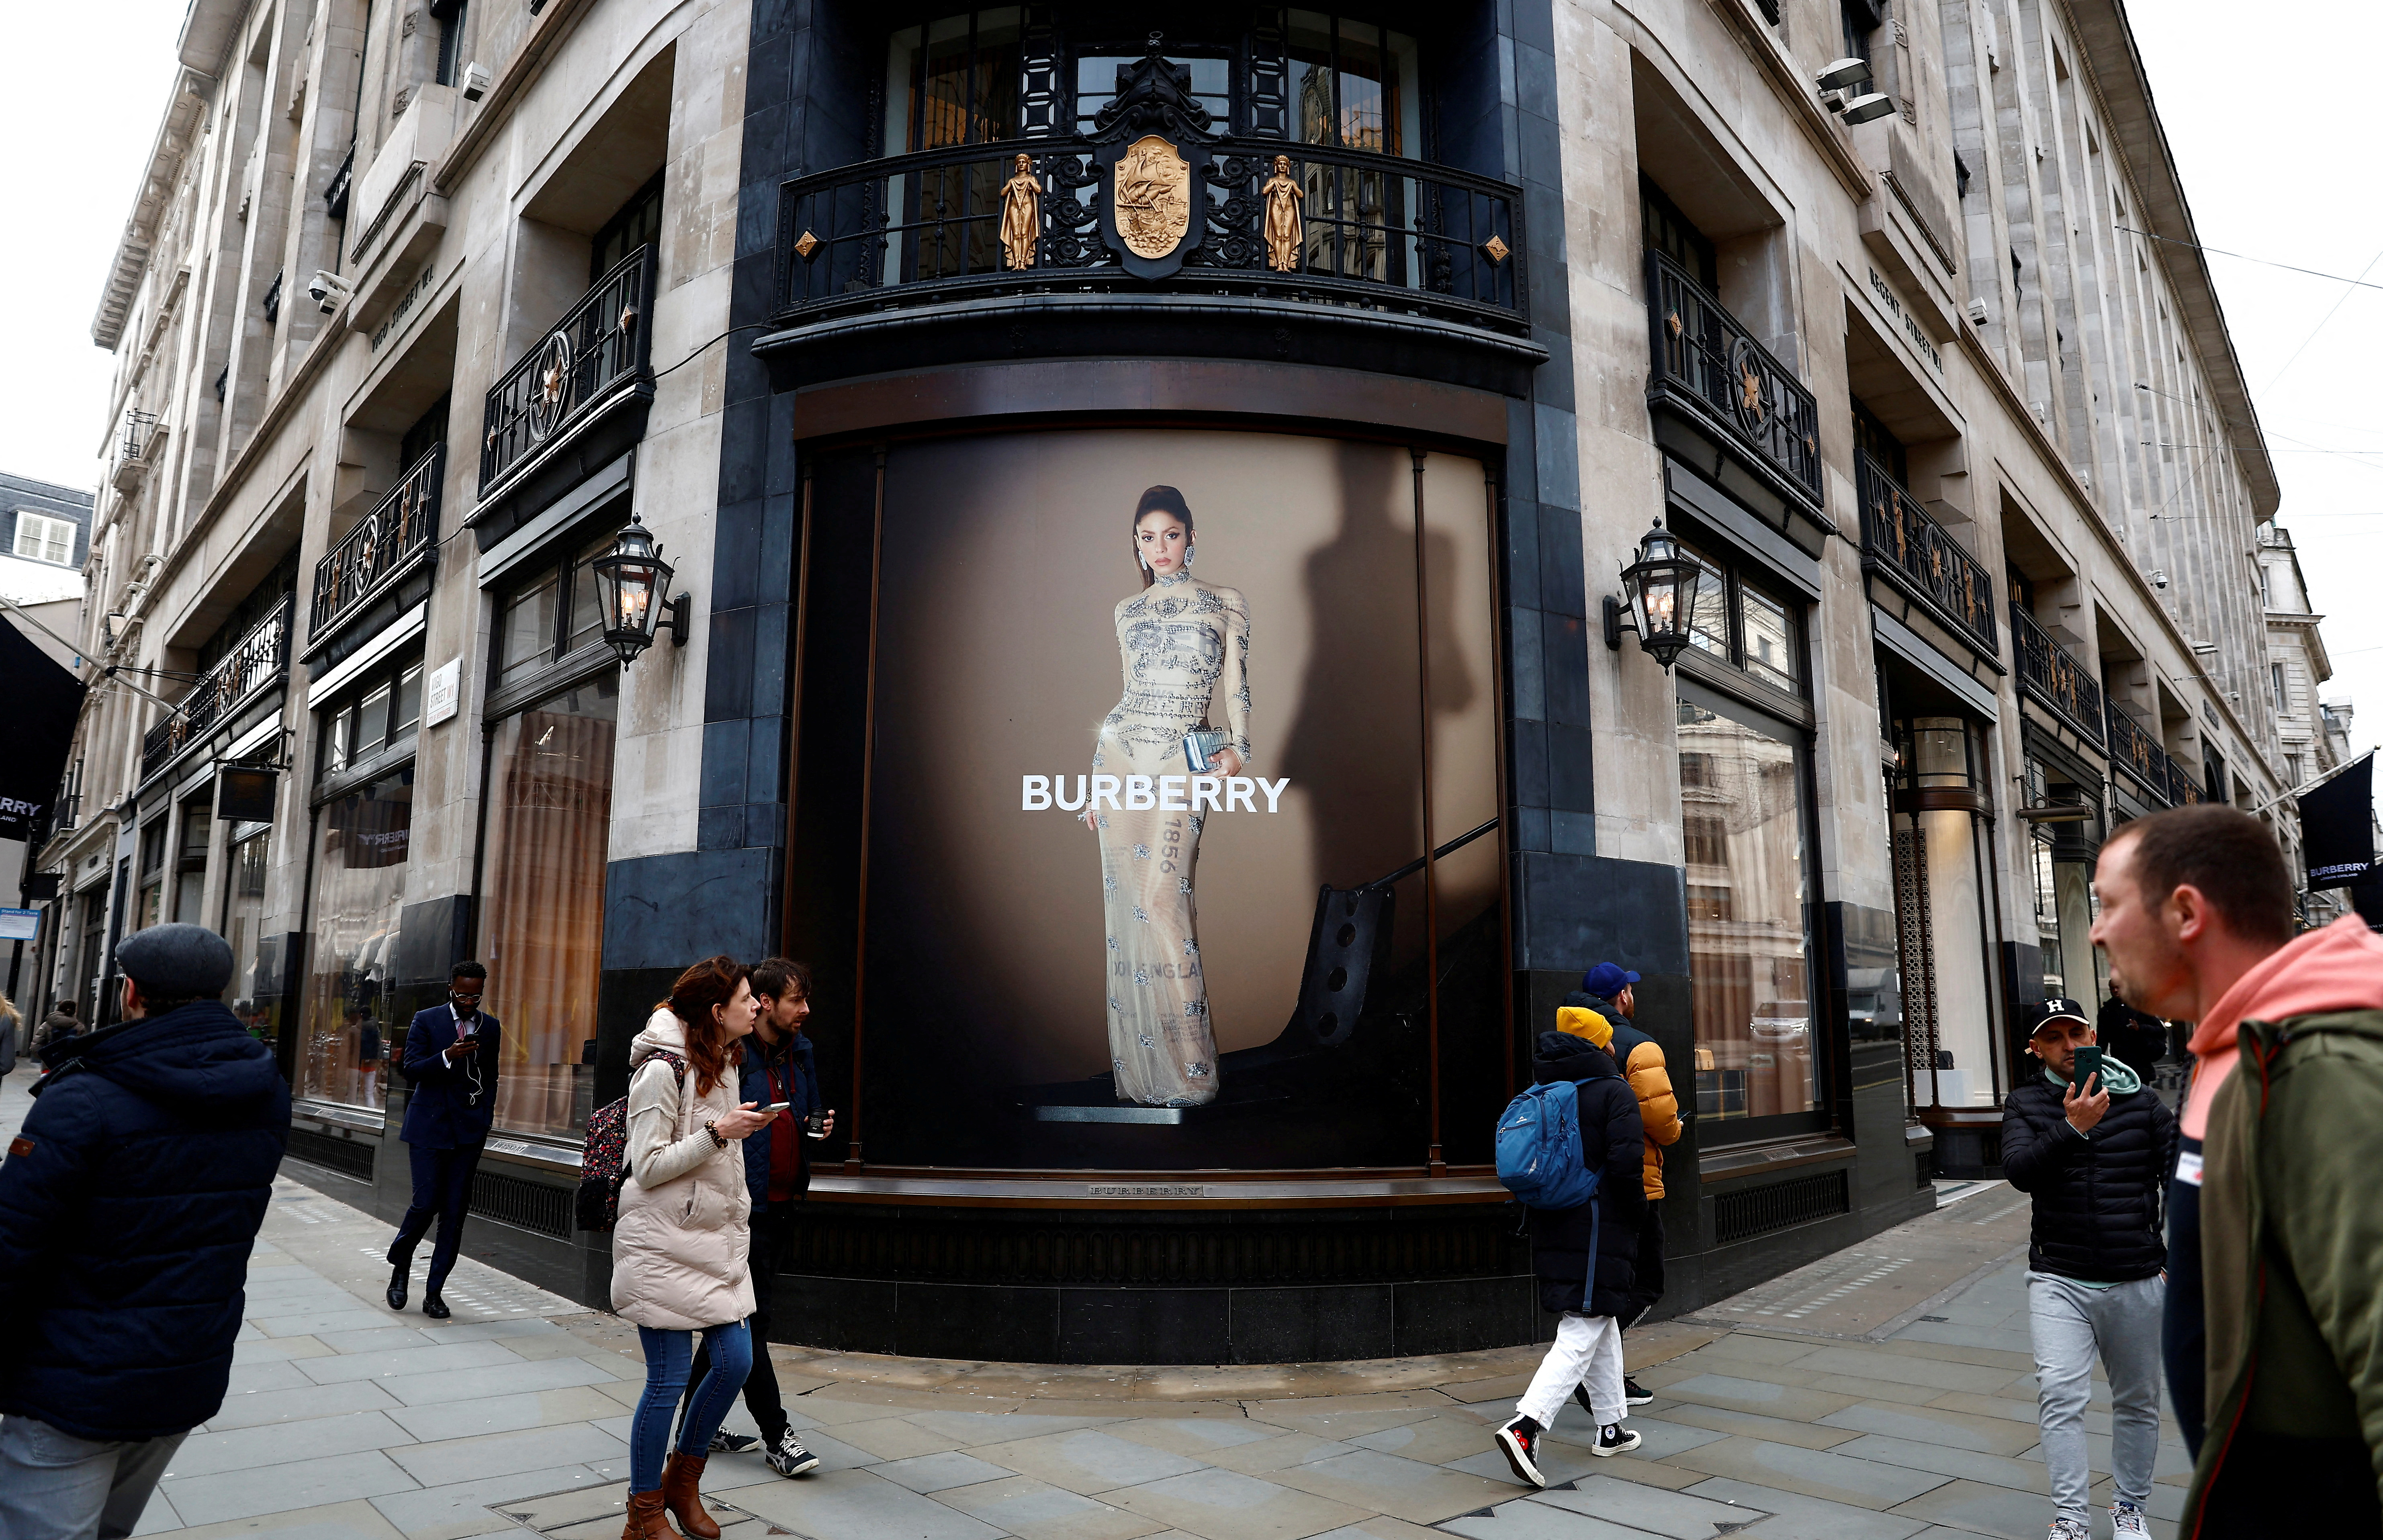 A Burberry store is seen in London